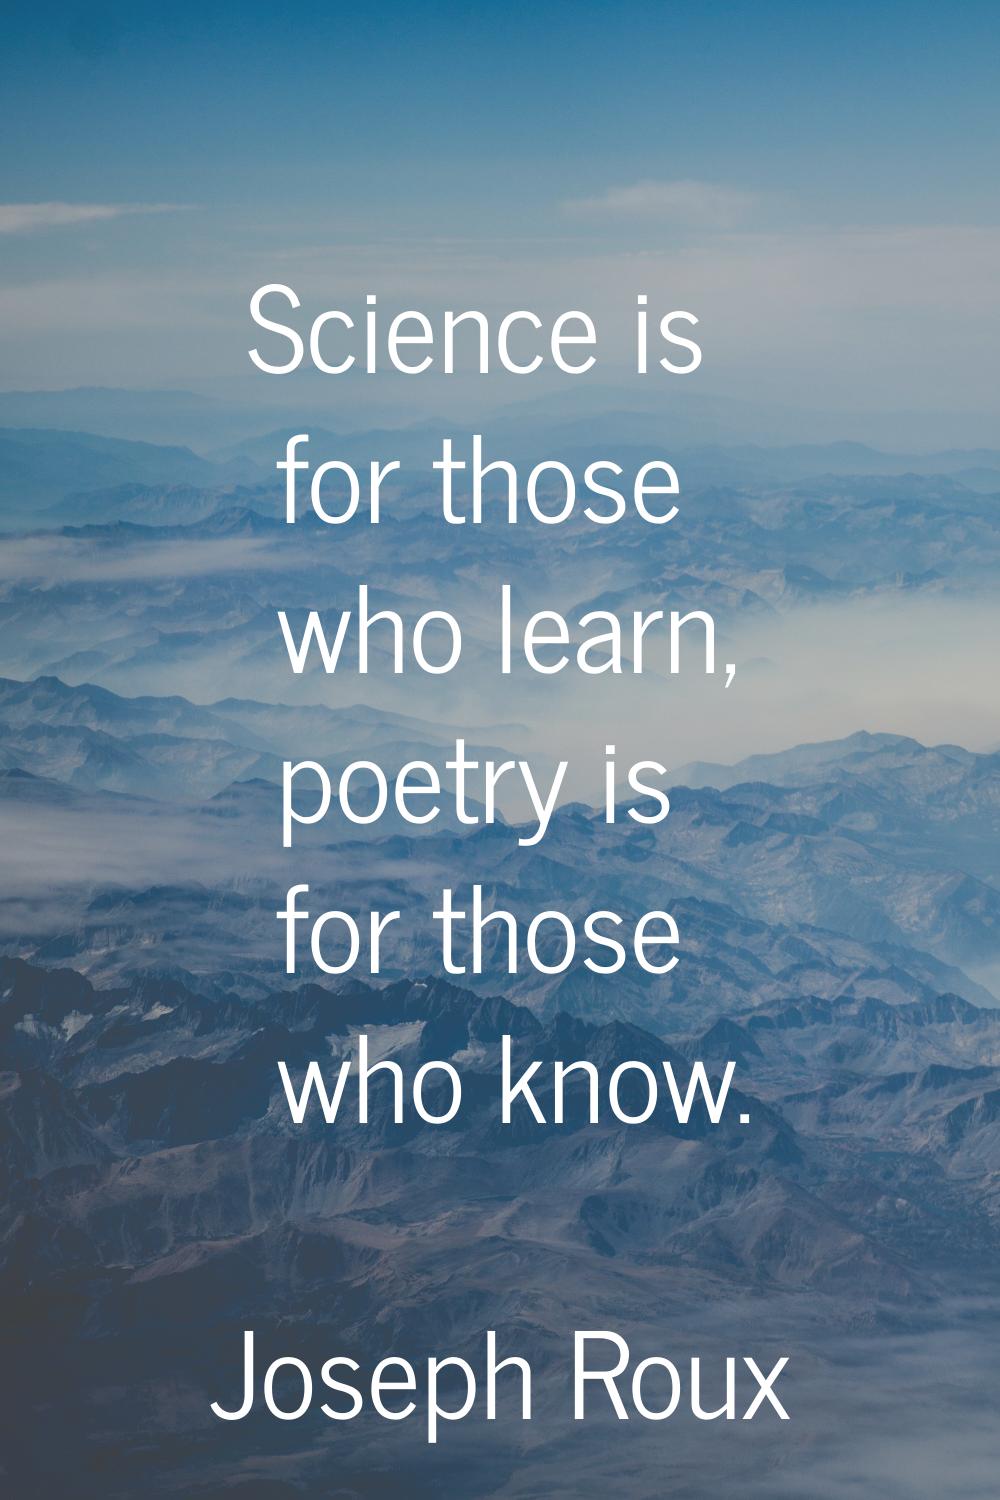 Science is for those who learn, poetry is for those who know.